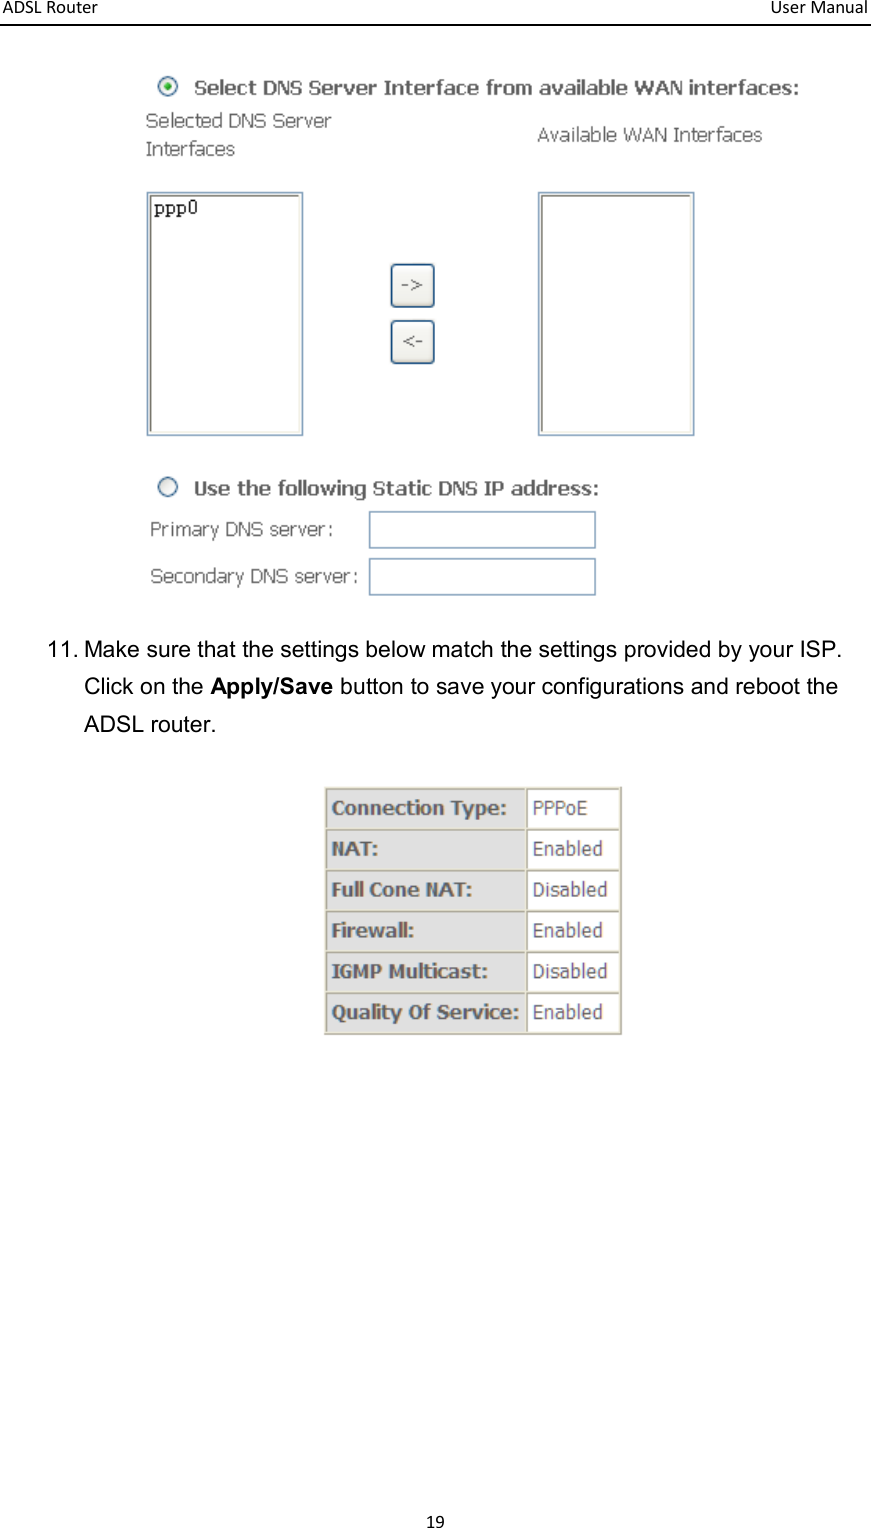 ADSL Router       User Manual 19  11. Make sure that the settings below match the settings provided by your ISP. Click on the Apply/Save button to save your configurations and reboot the ADSL router.        